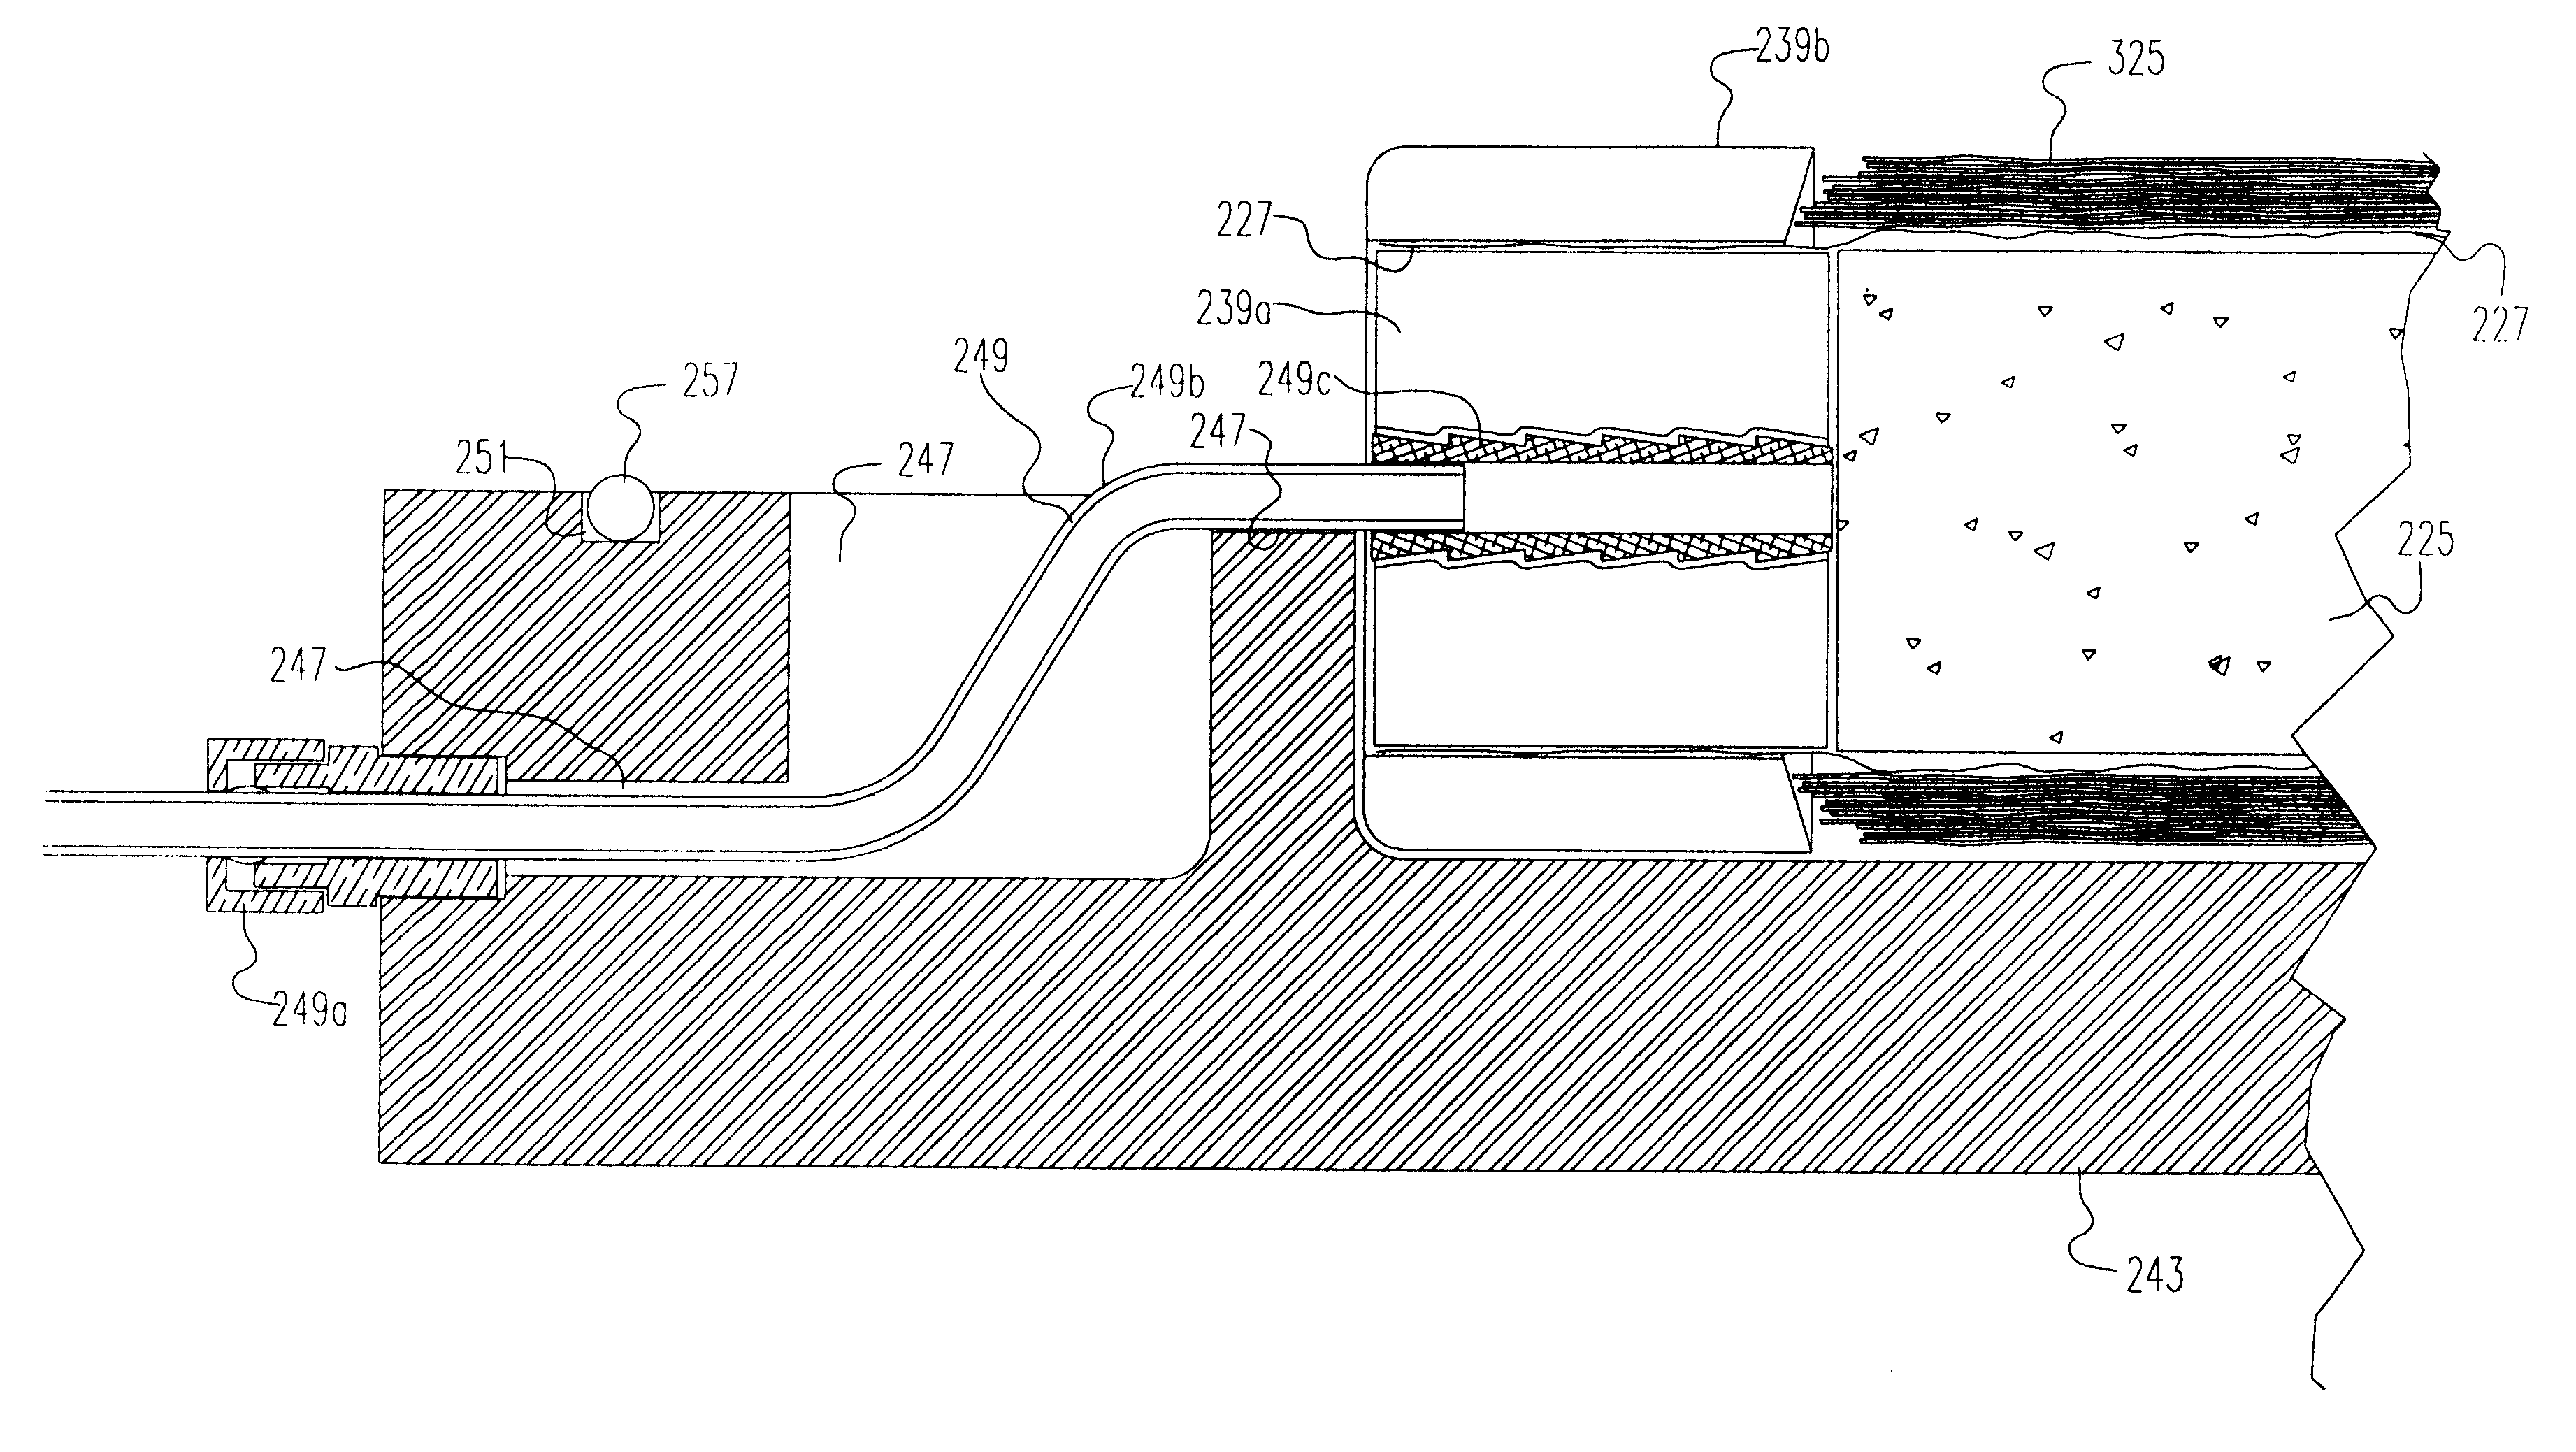 Method for manufacturing composite bicycle frame